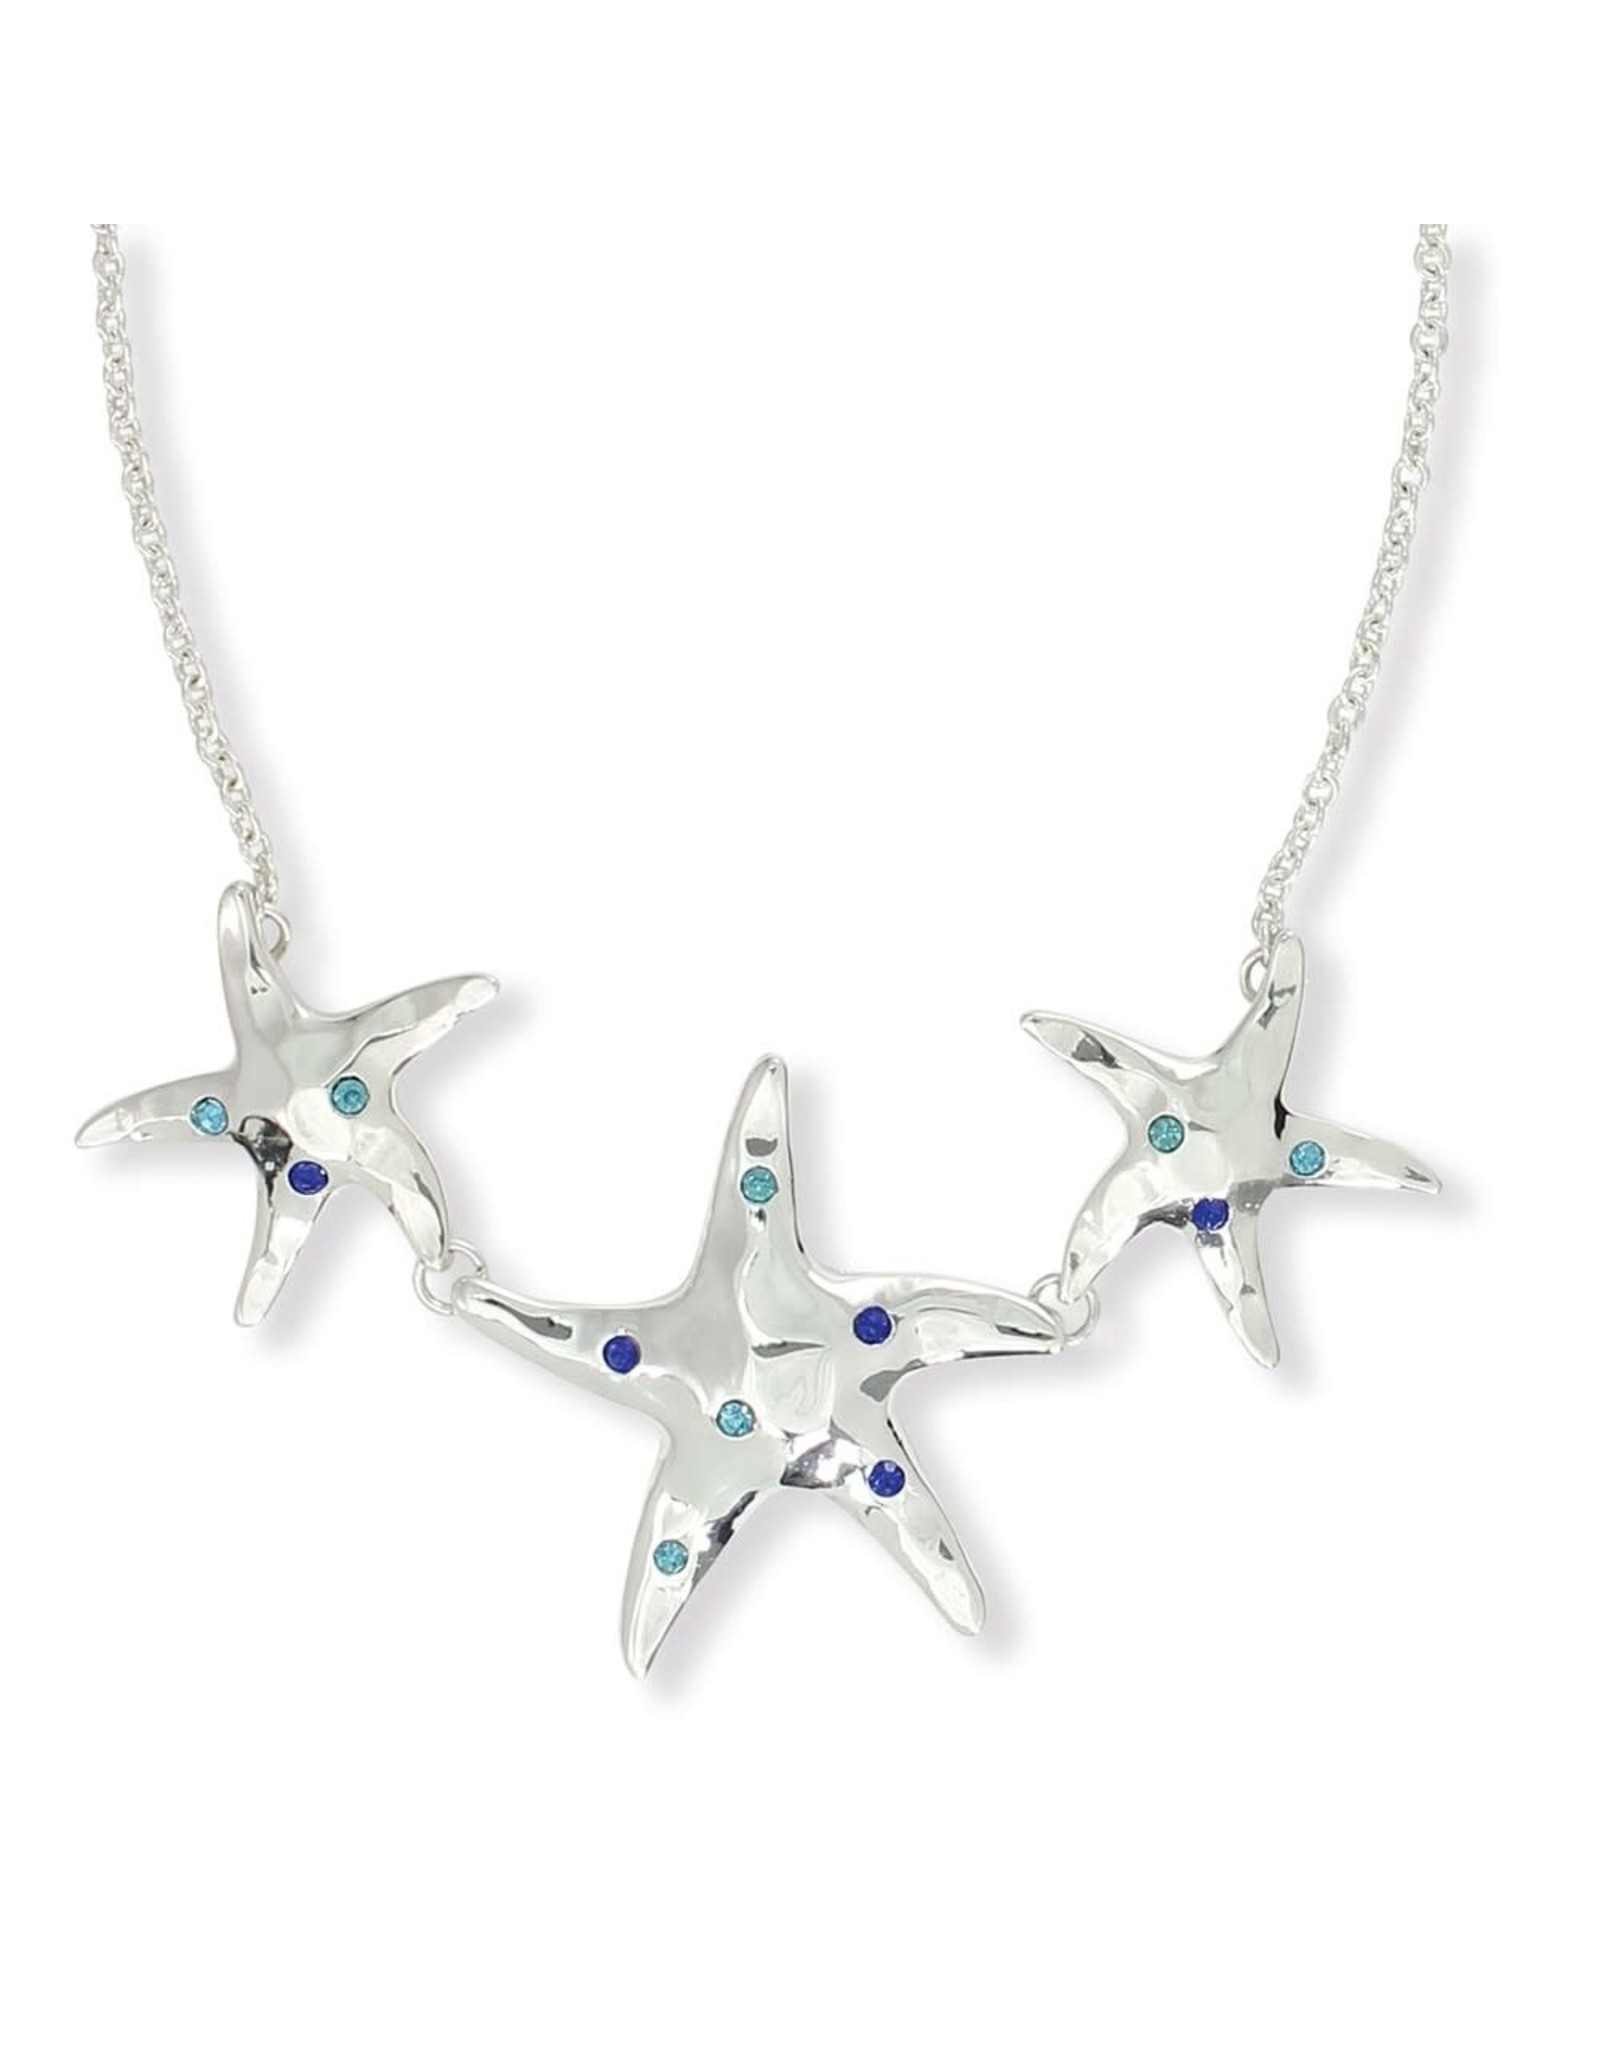 Periwinkle by Barlow Necklace Silver Hammered Starfish With Crystals